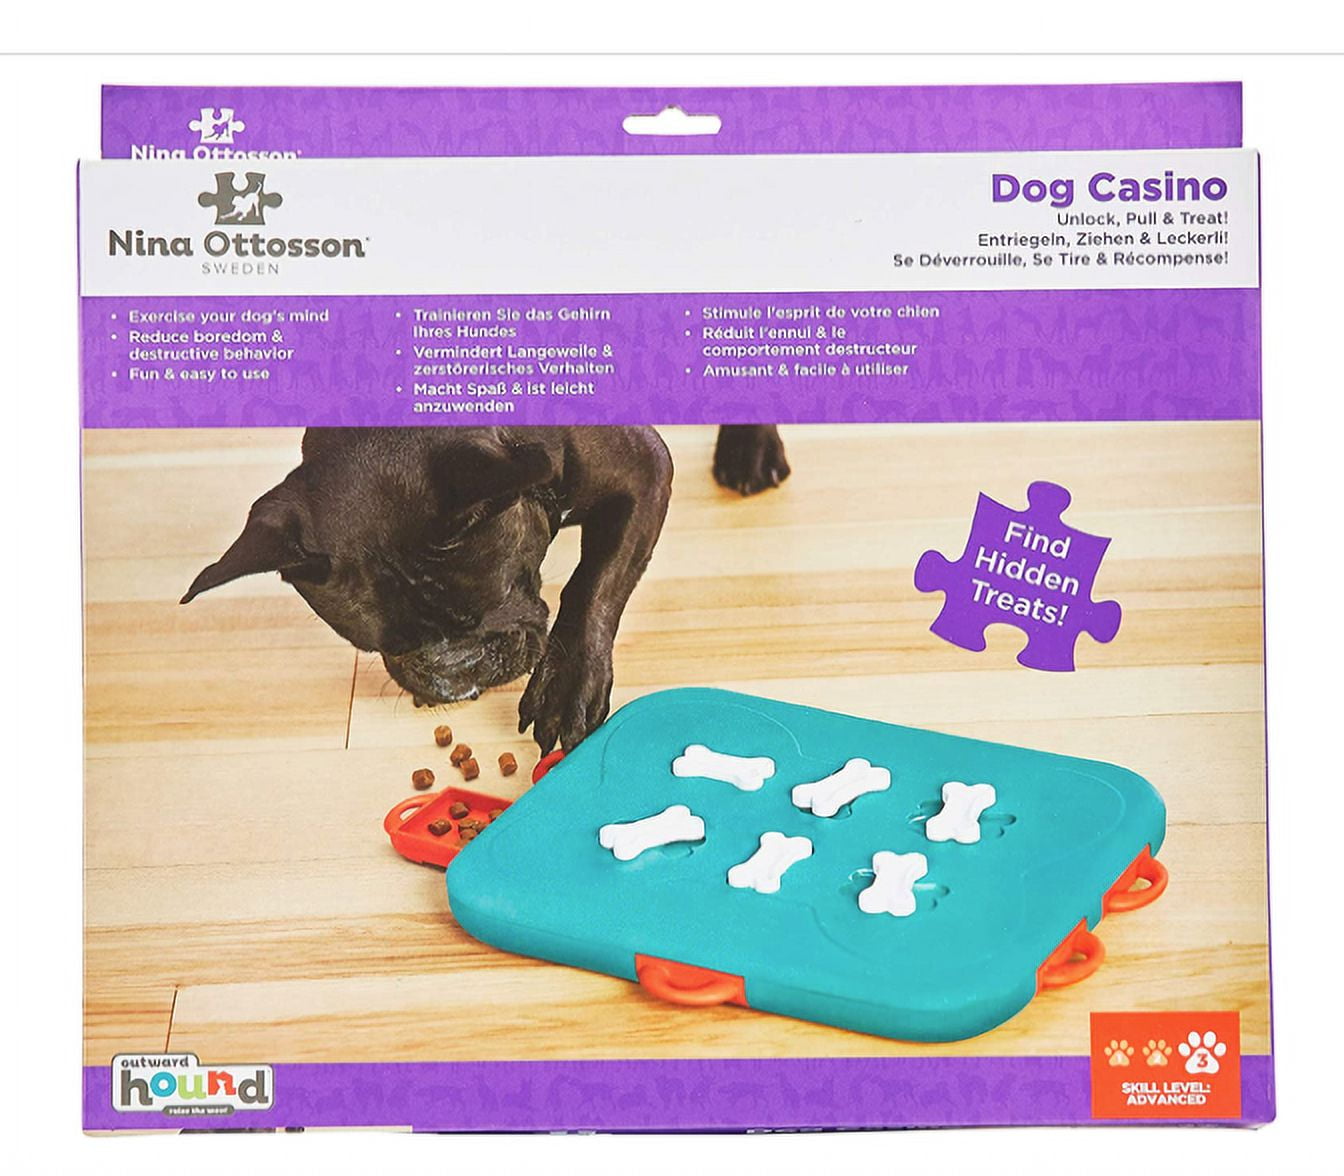 Dog Casino Interactive Treat Puzzle Dog Toy Advanced Puzzle Game Finds  Hidden Treats To Challenge Your Dog's Ability - Dog Toys - AliExpress